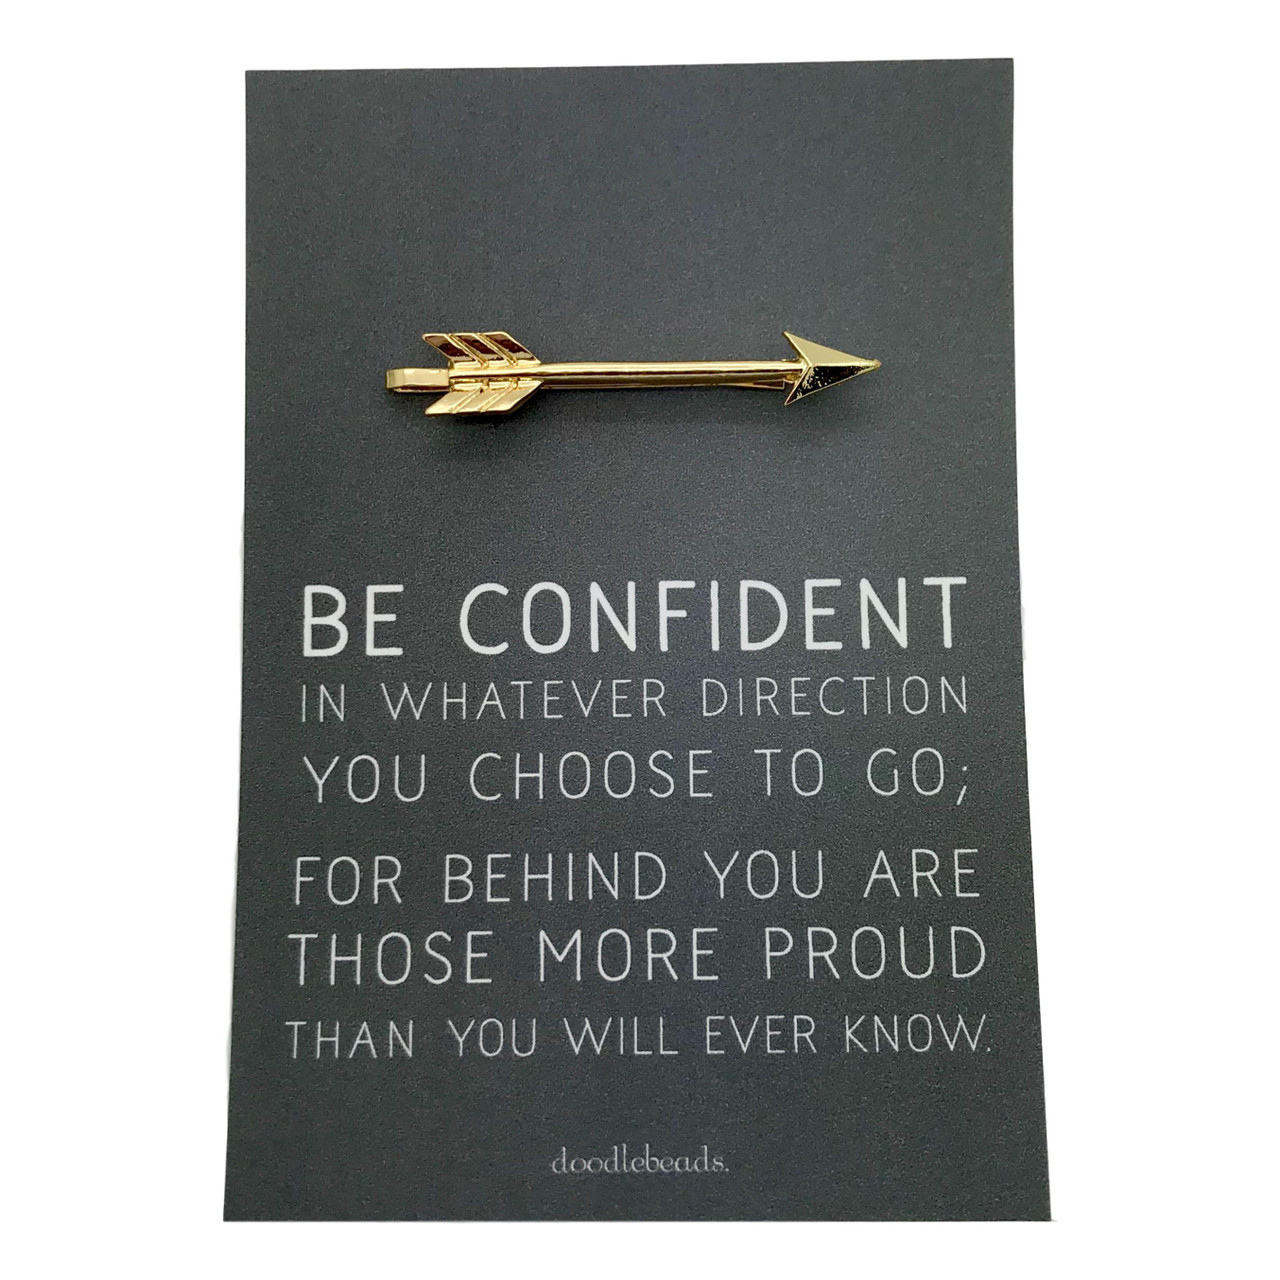 Be Confident (Tie Bar Gold)*